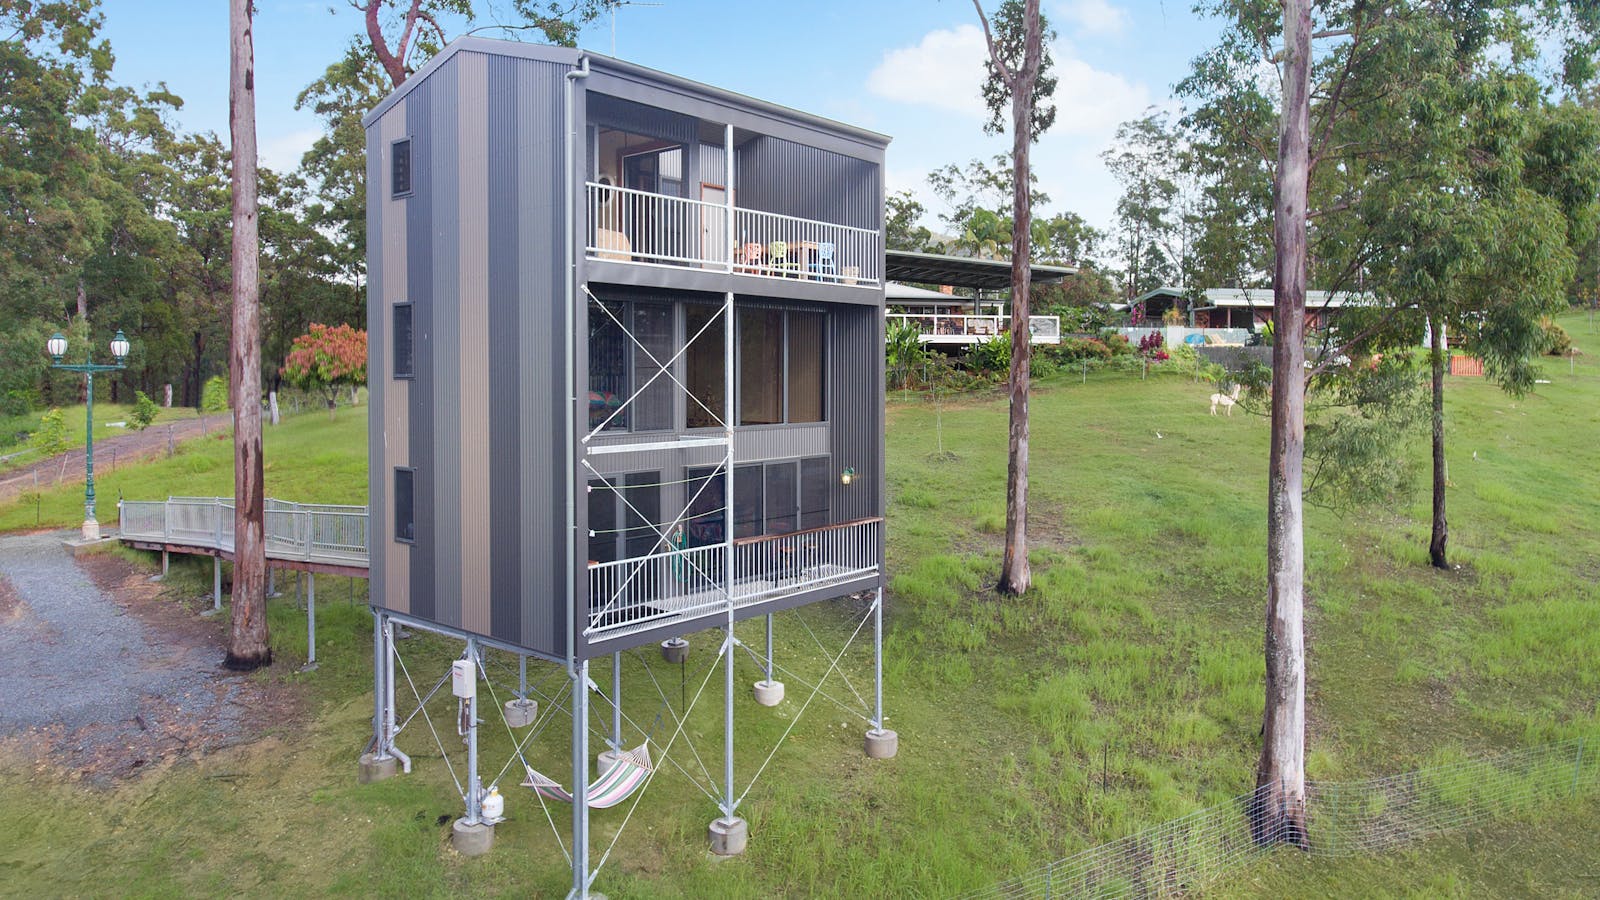 Perched high amongst the gumtrees with the best view of the Gold Coast City,of the treehouses